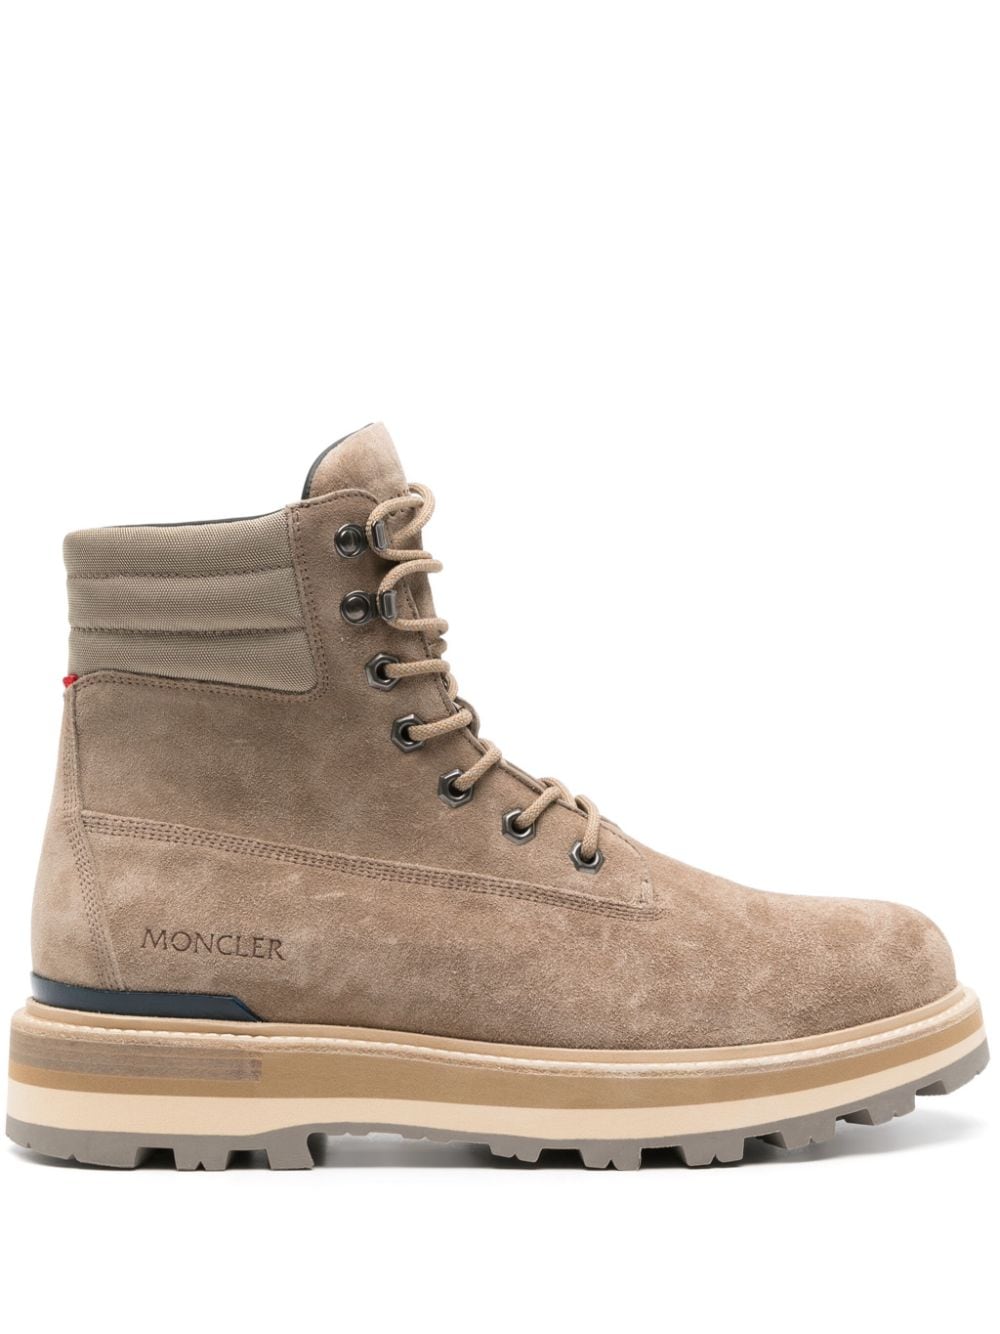 Moncler Peka Suede Hiking Boots In White